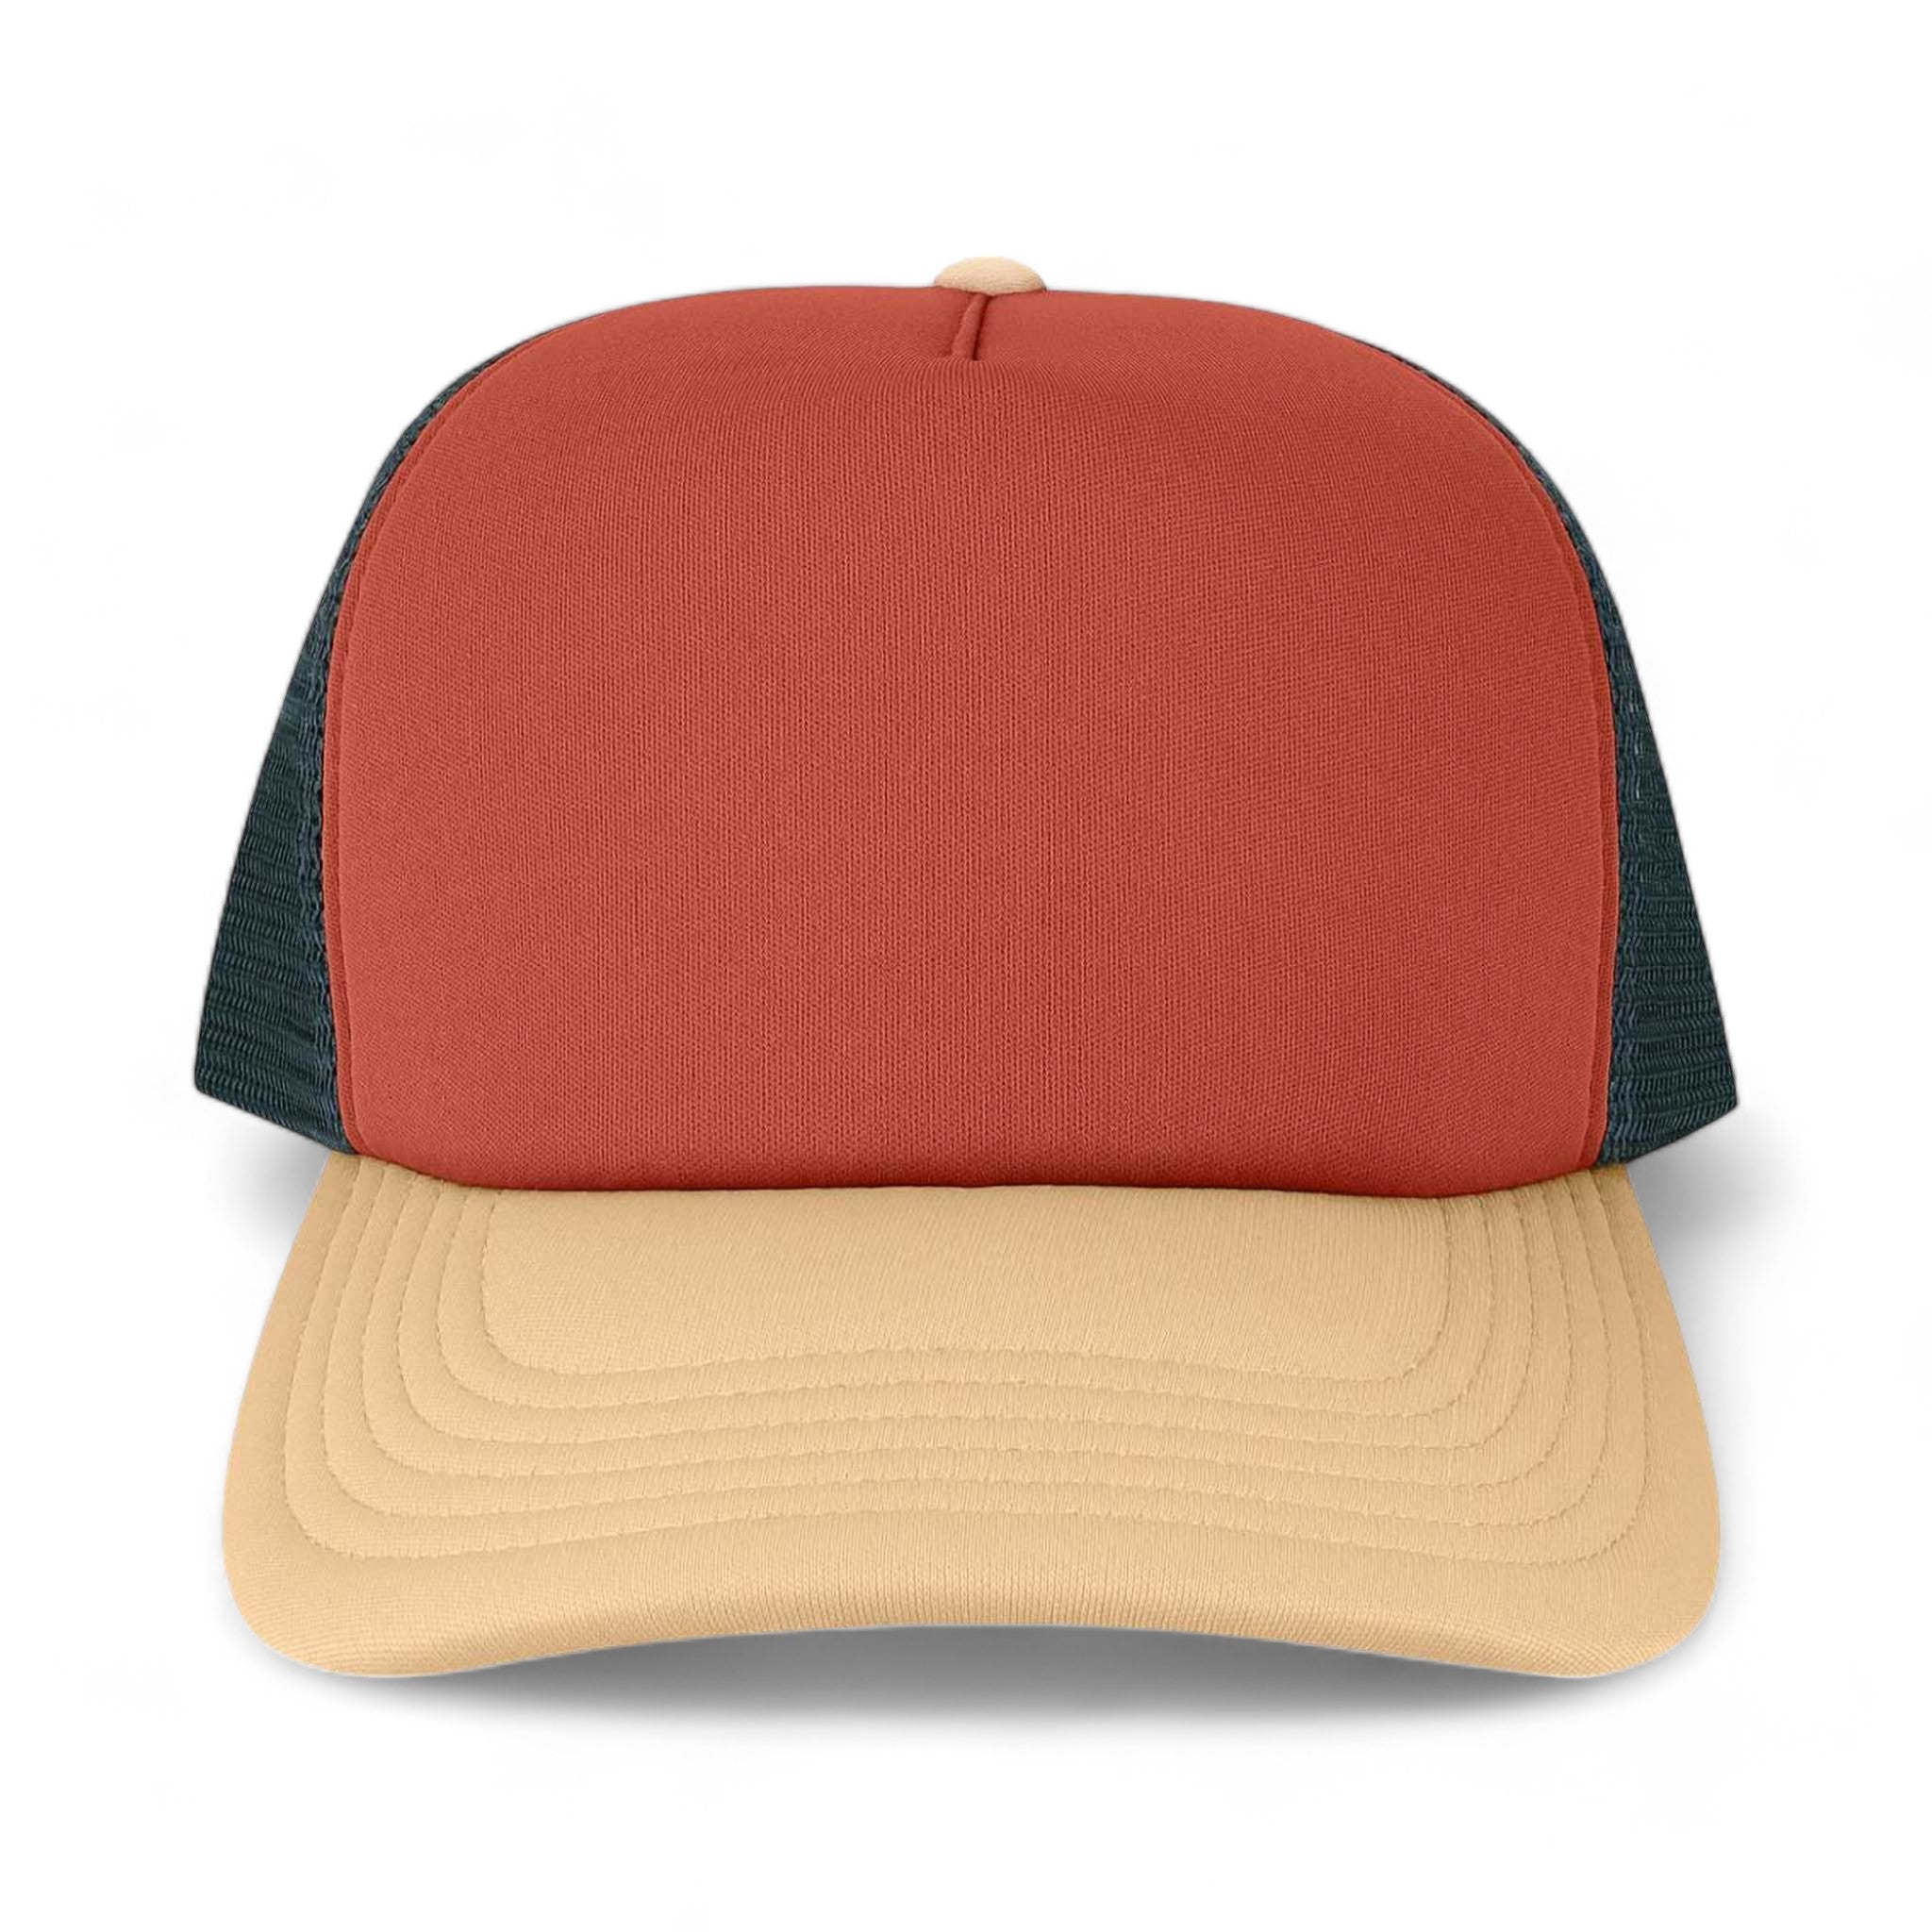 Front view of LEGACY LTA custom hat in sienna, wheat and navy